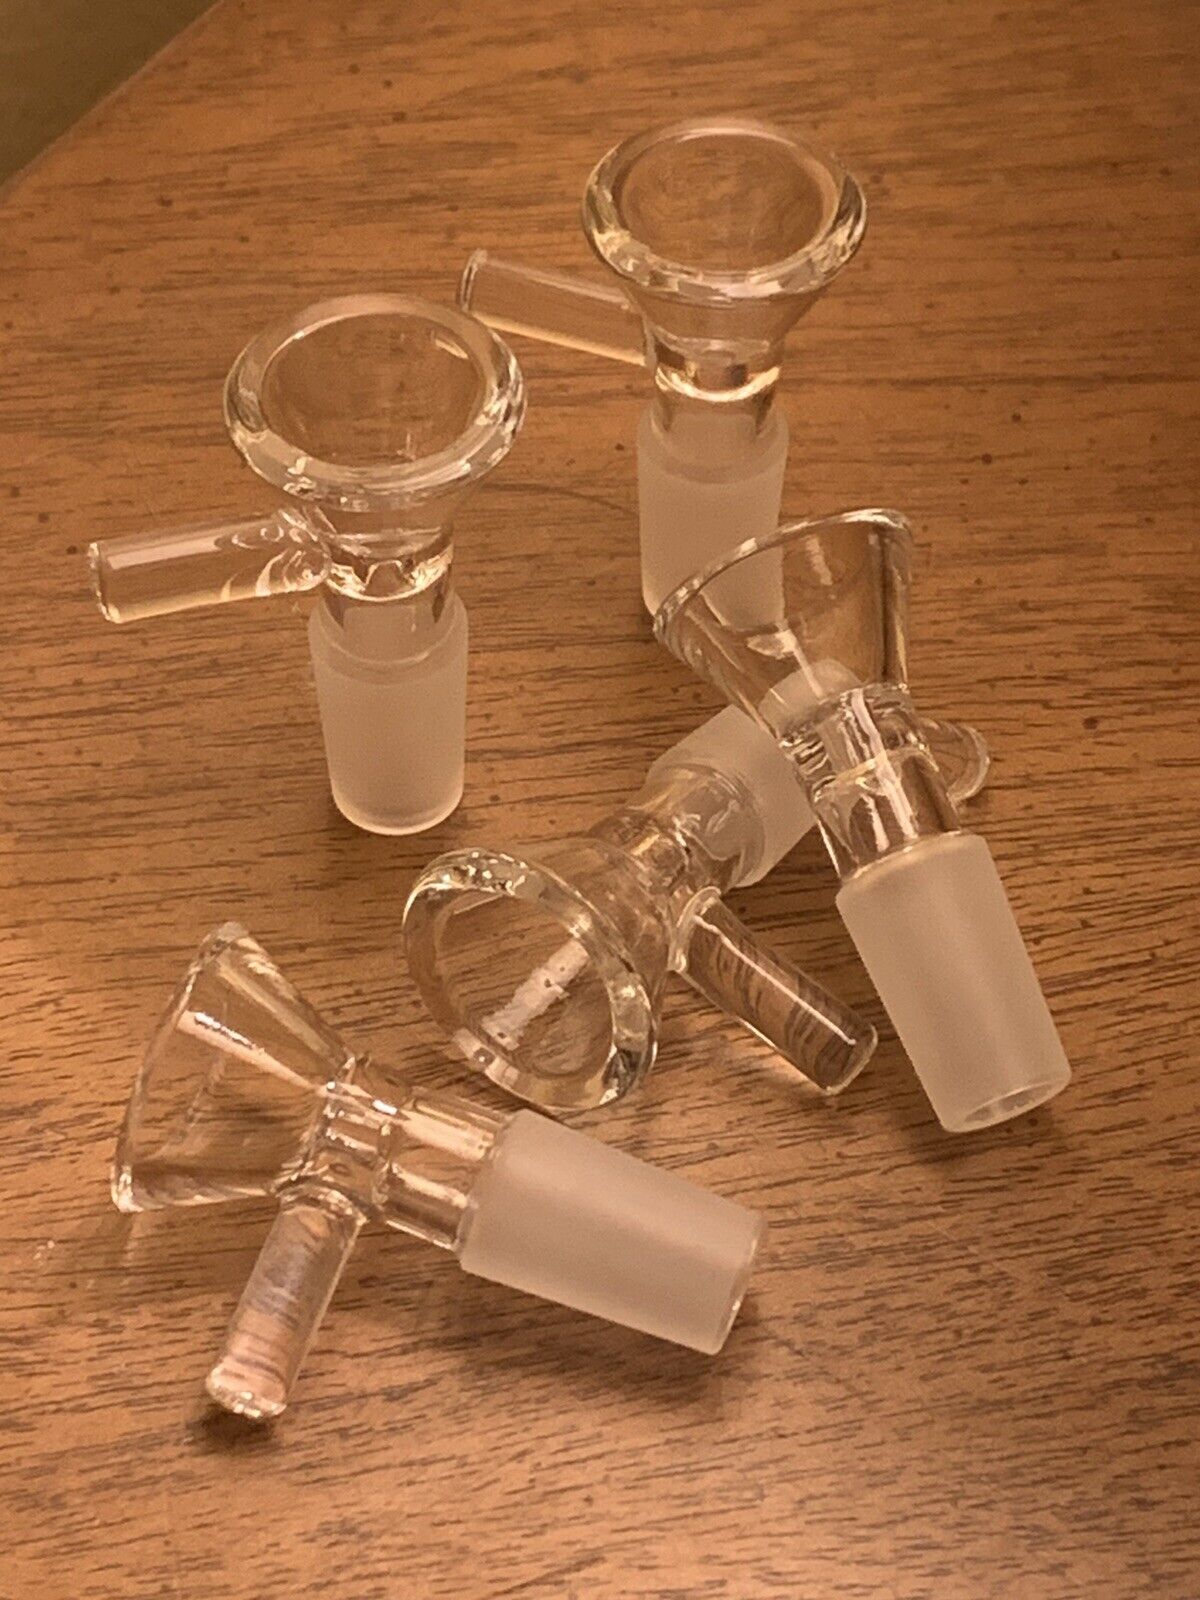 5X 14MM Male Glass Bong Bowl Replacement Head Piece - 5 Pack